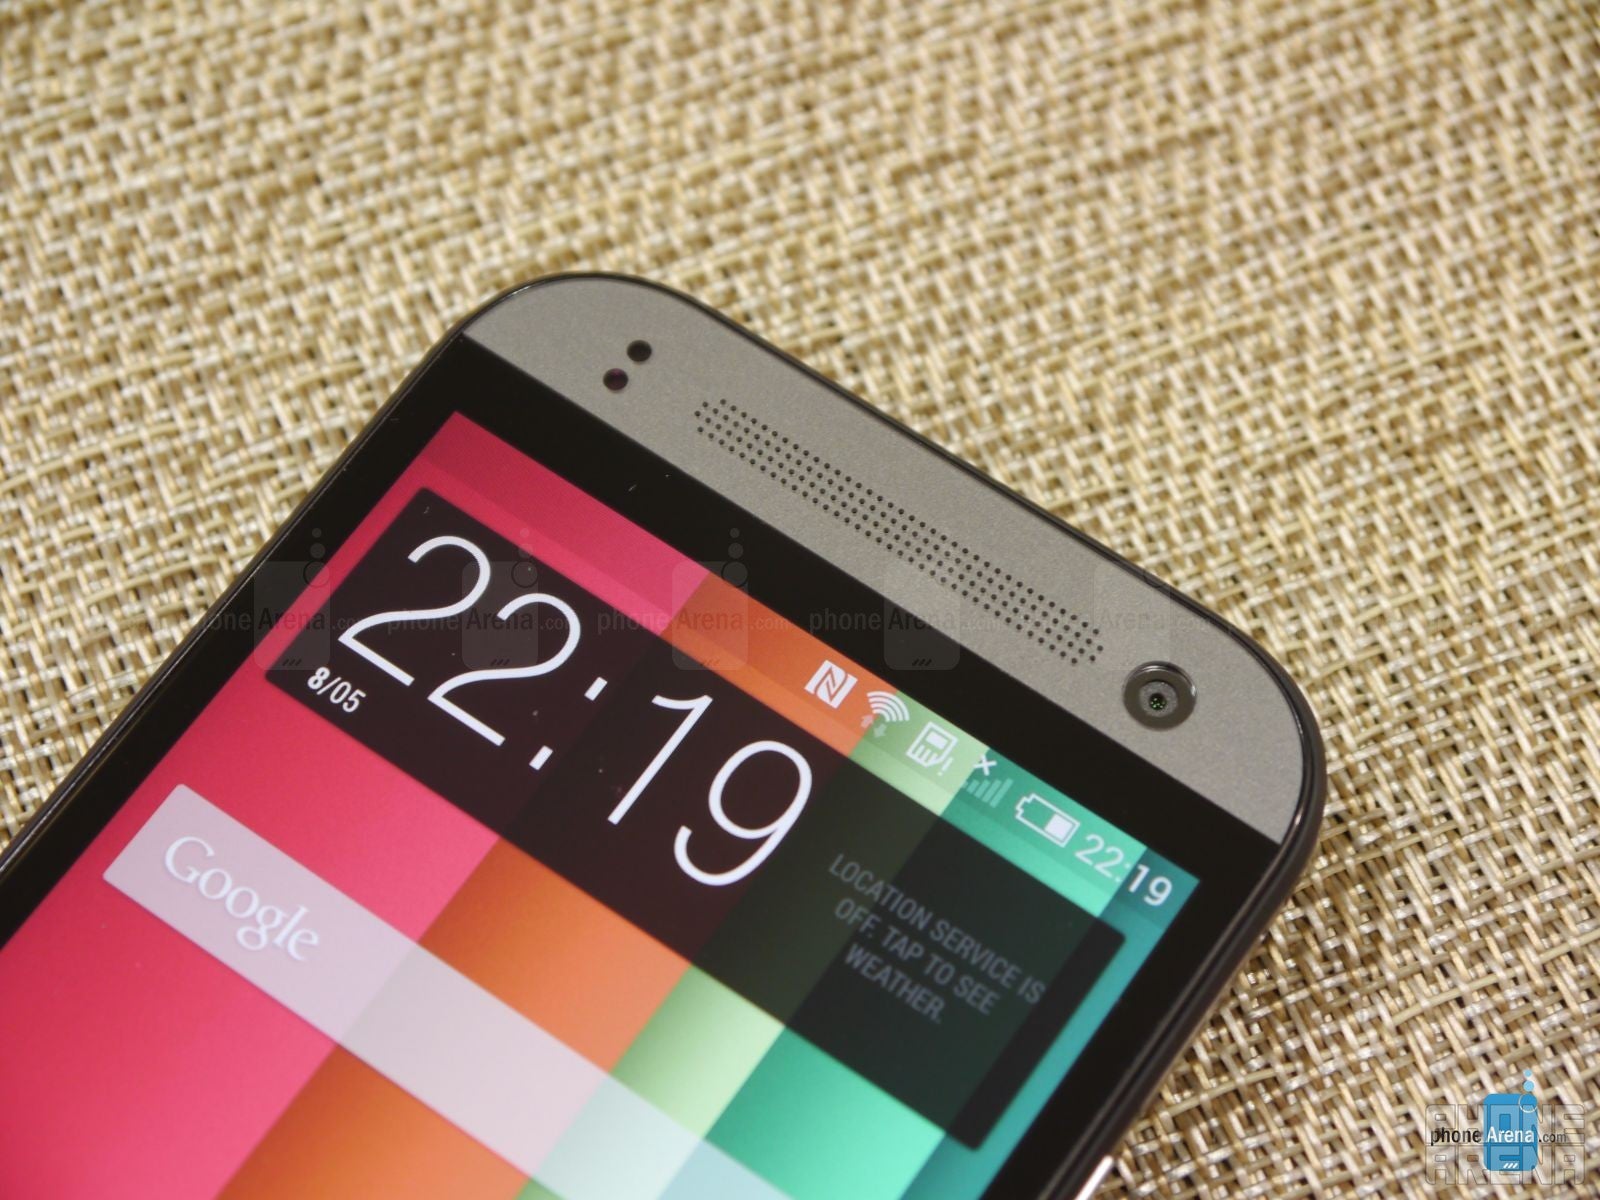 The HTC One mini 2 features a 4.5-inch 720p Super LCD-3 display. - HTC One mini 2 hands-on